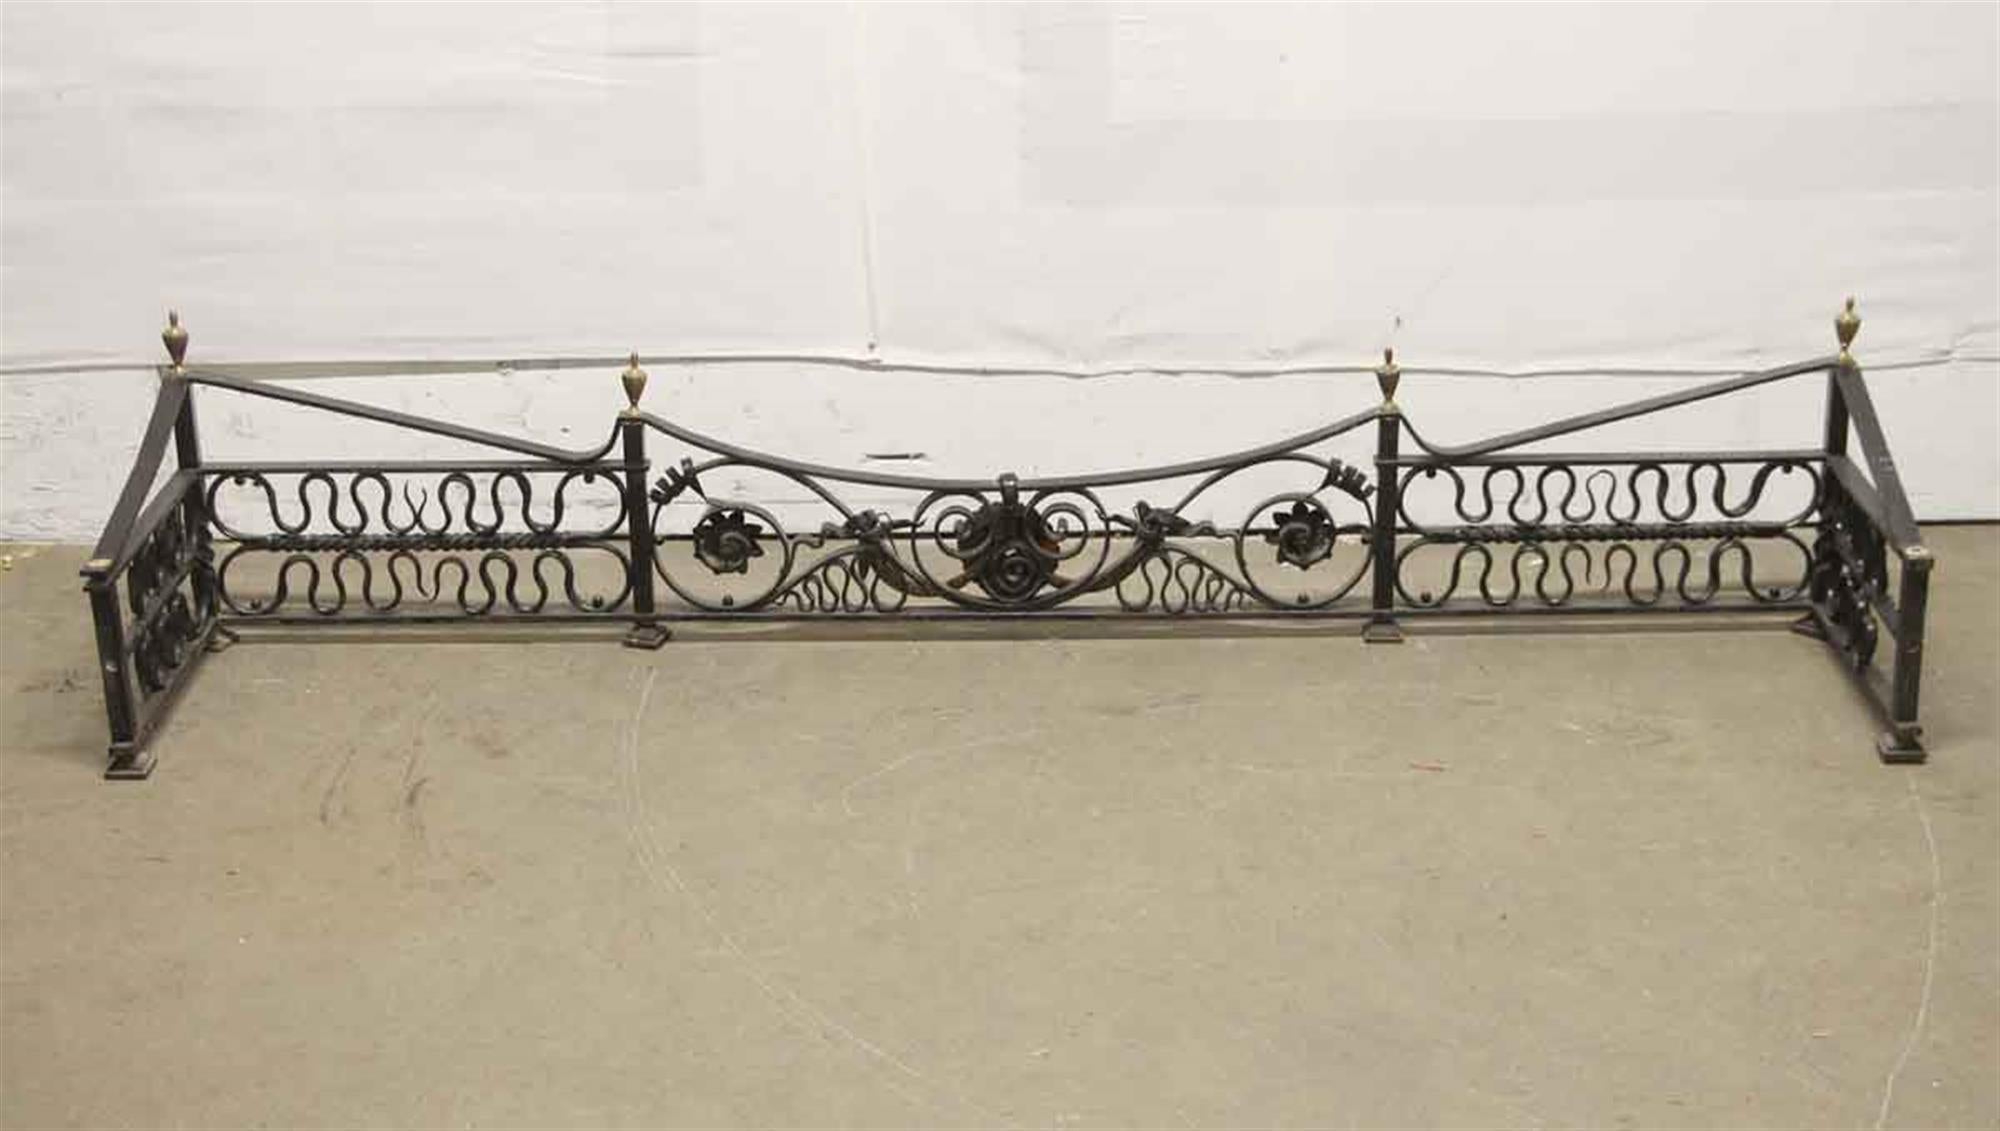 19th century wrought iron fireplace fender with intricate black finished ironwork and brass finials. There is general wear from age and use. This can be seen at our 400 Gilligan St location in Scranton, PA.